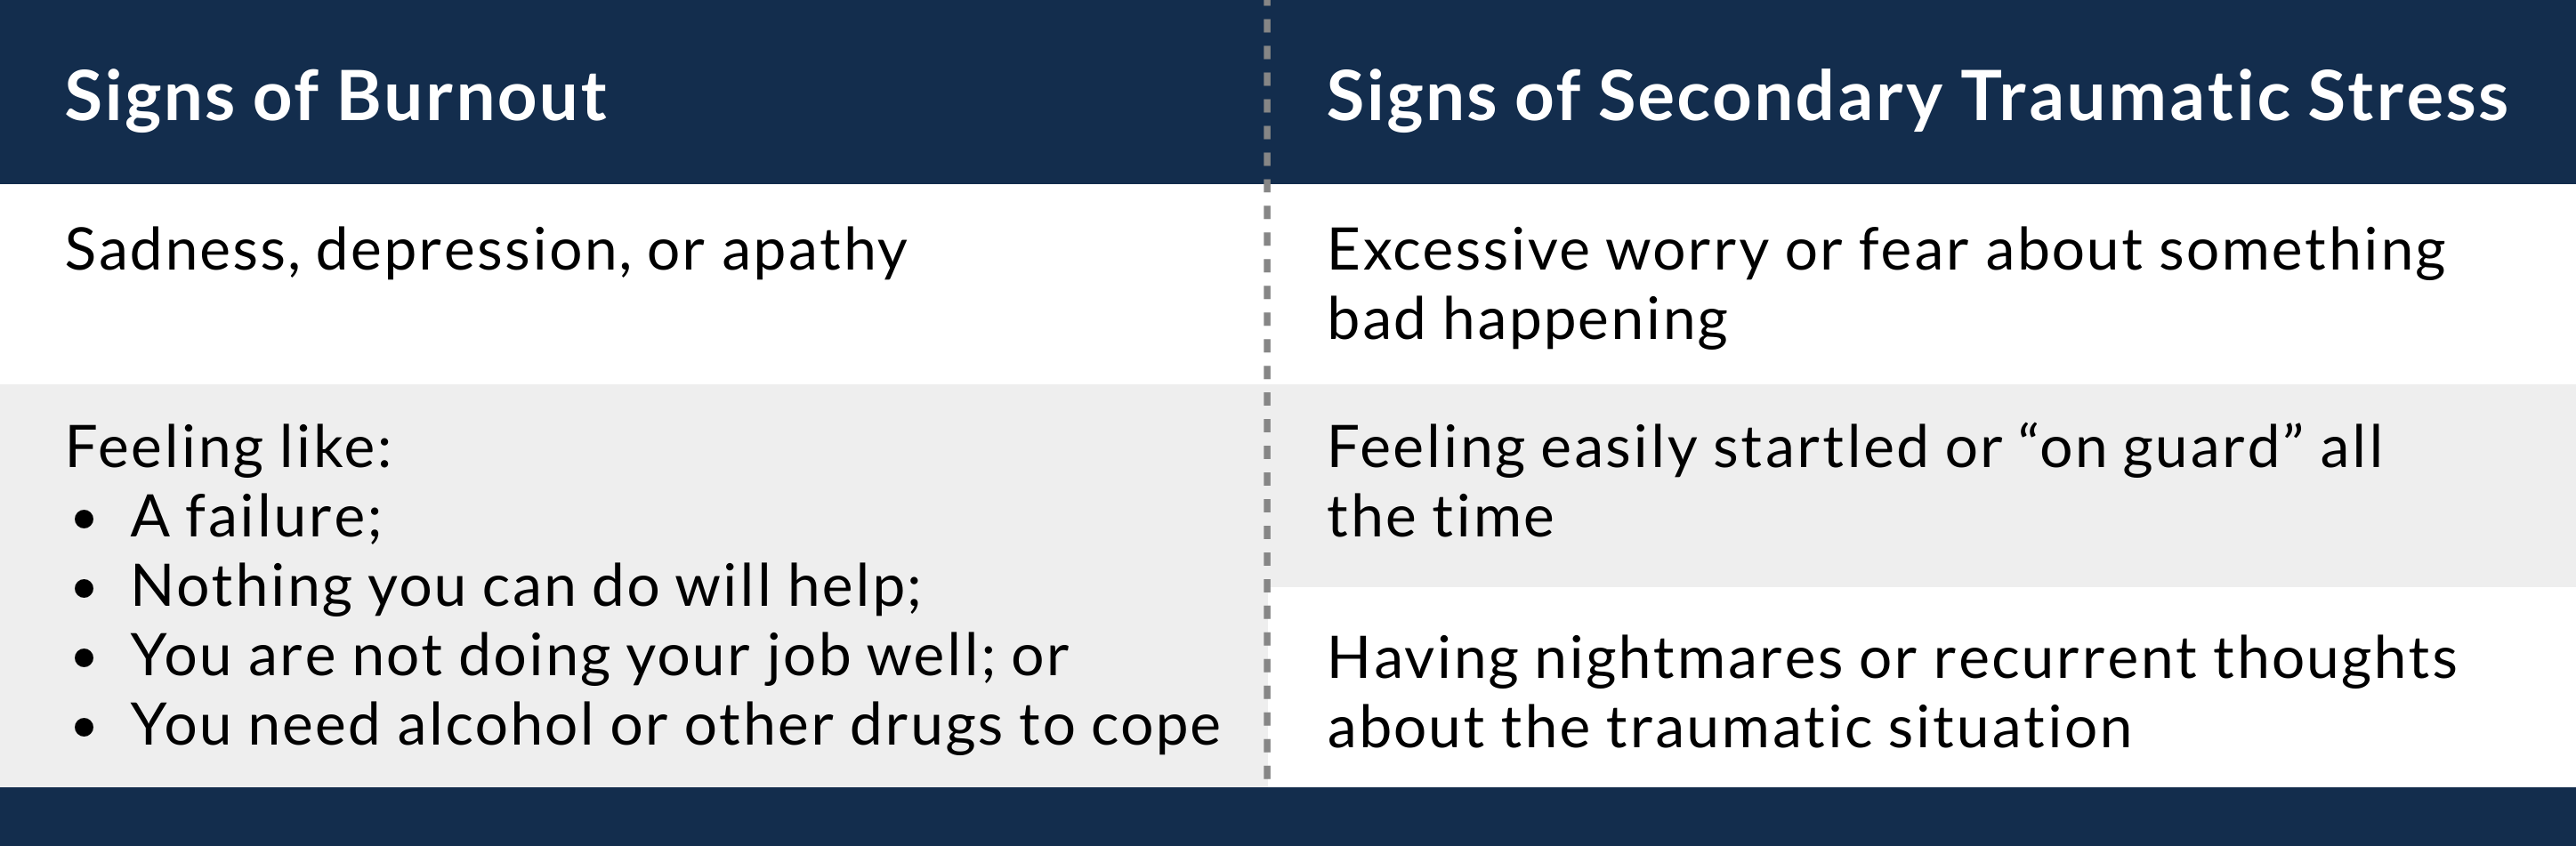 Table_14.1_Signs_of_burnout_and_secondary_traumatic_stress.png